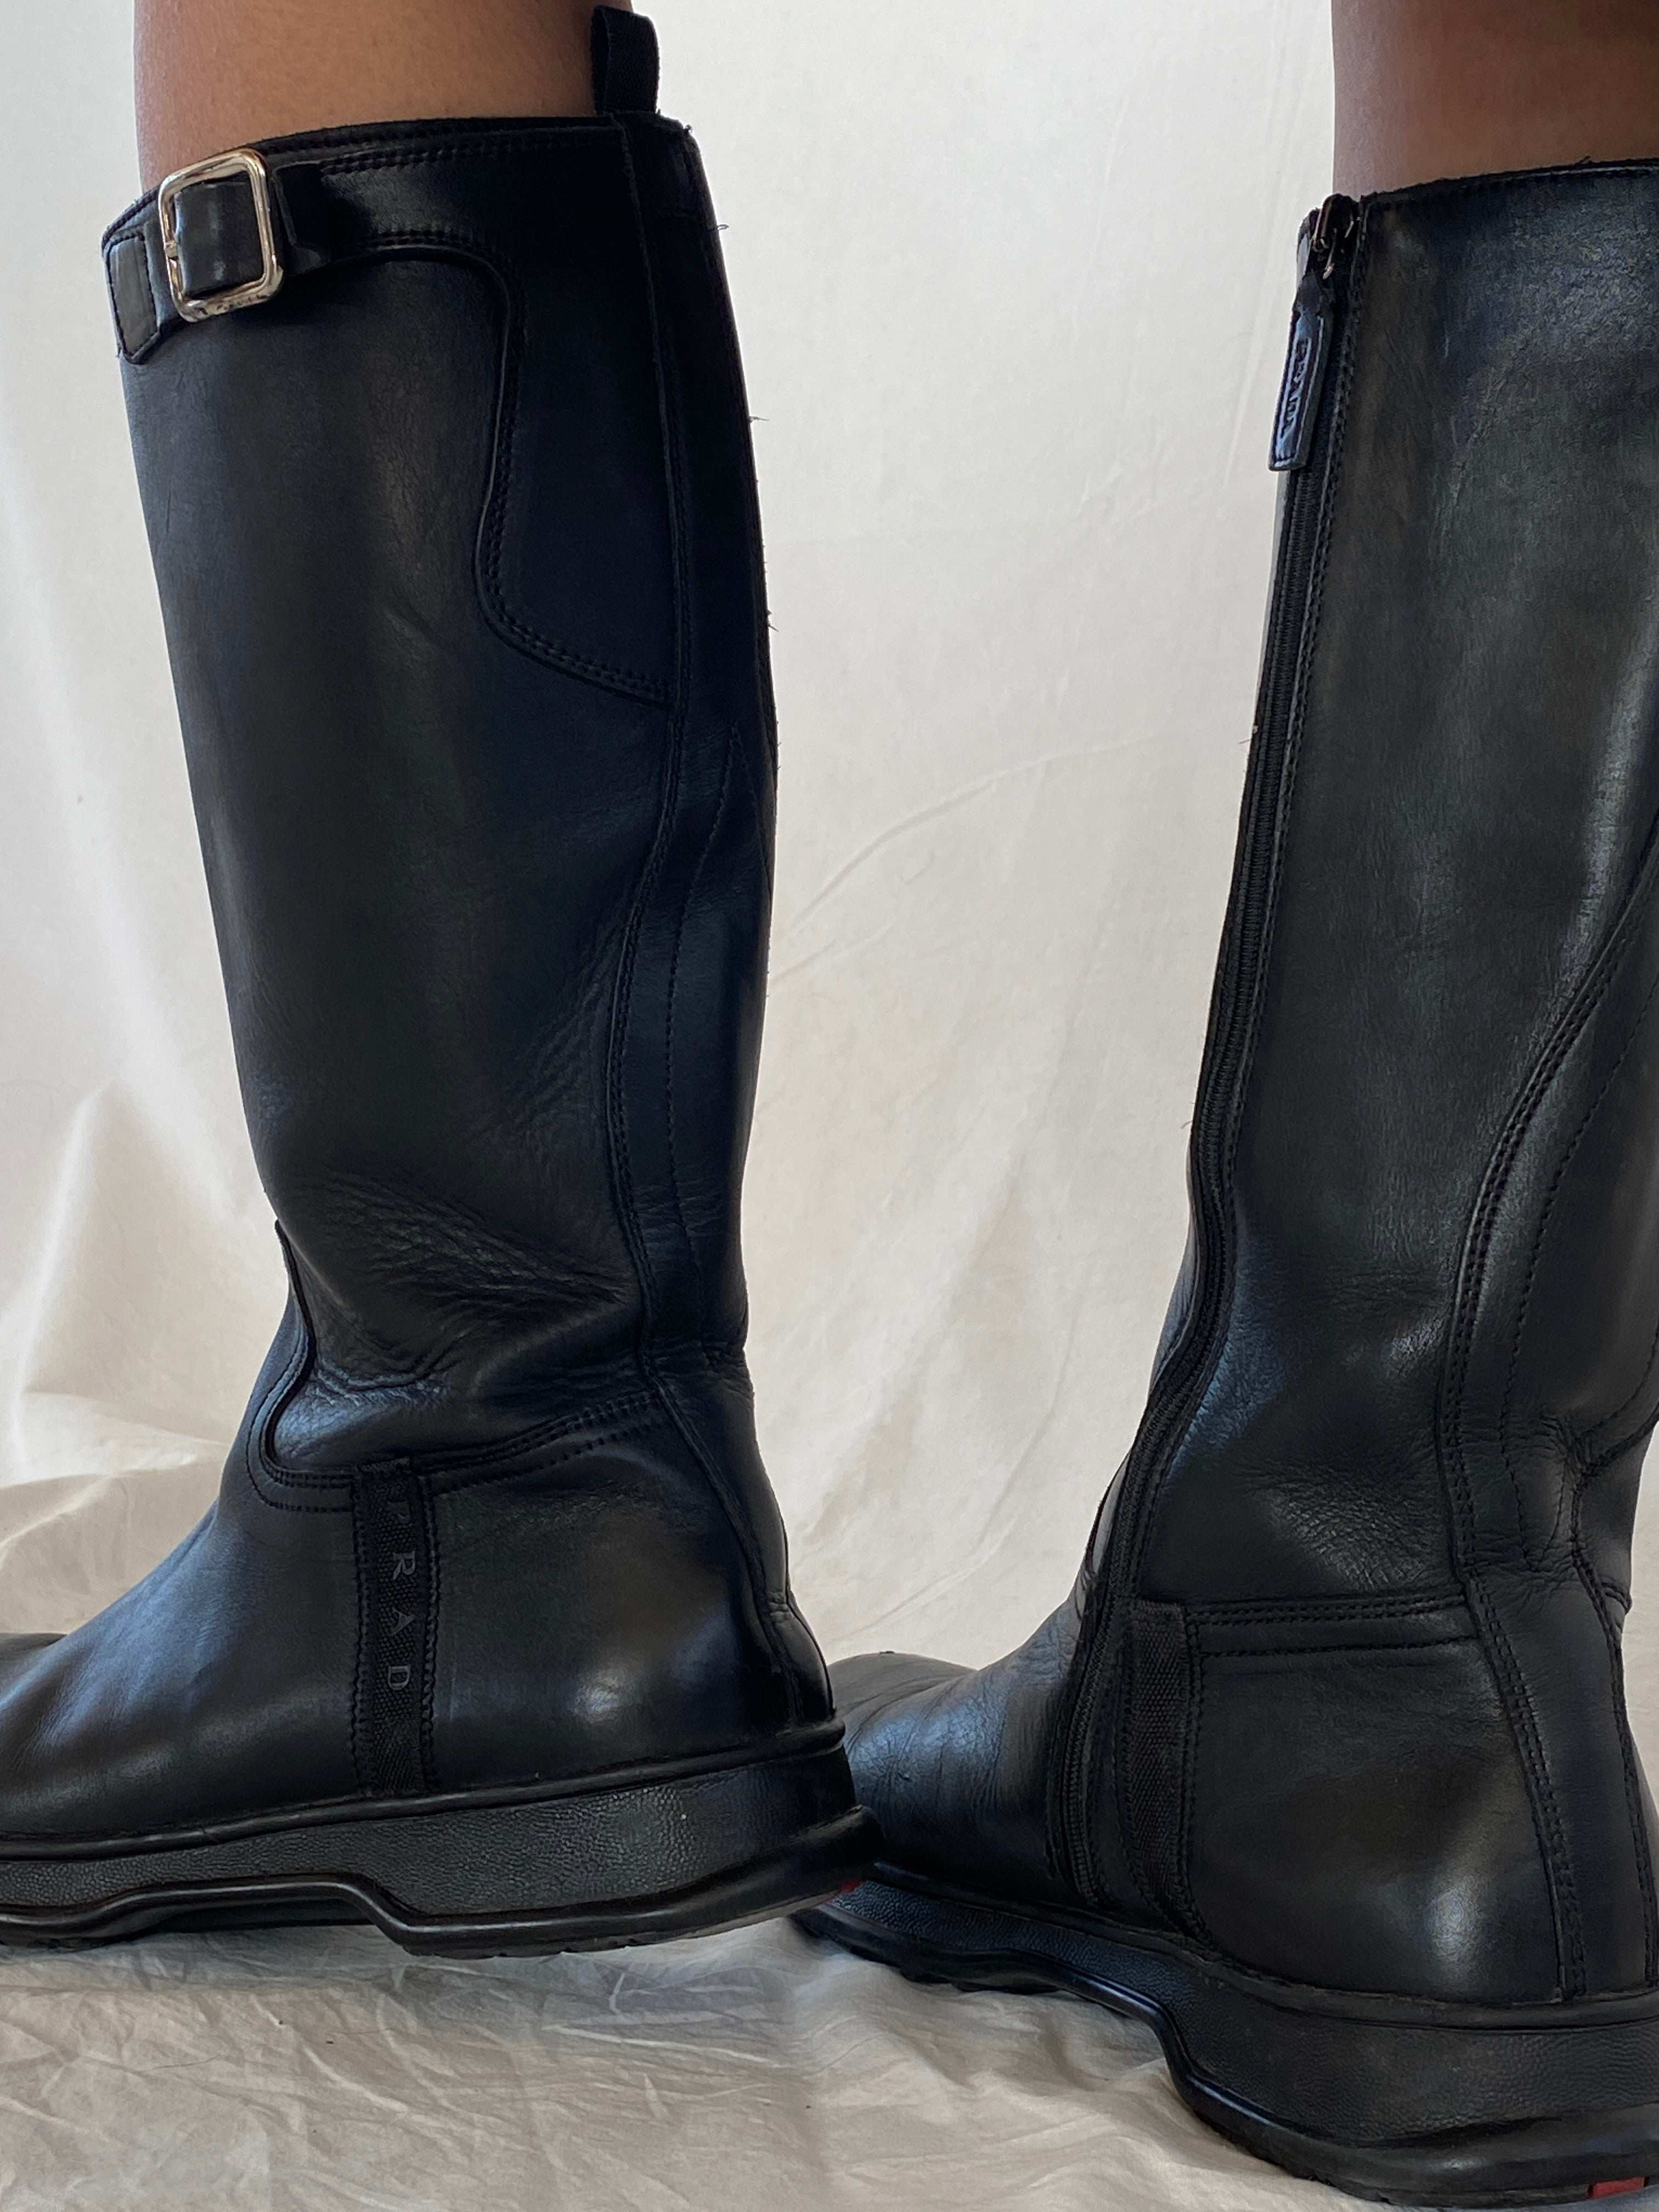 Vintage 90s PRADA Leather Moto boots - Balagan Vintage Boots 00s,90s,Boots,Juana,NEW IN